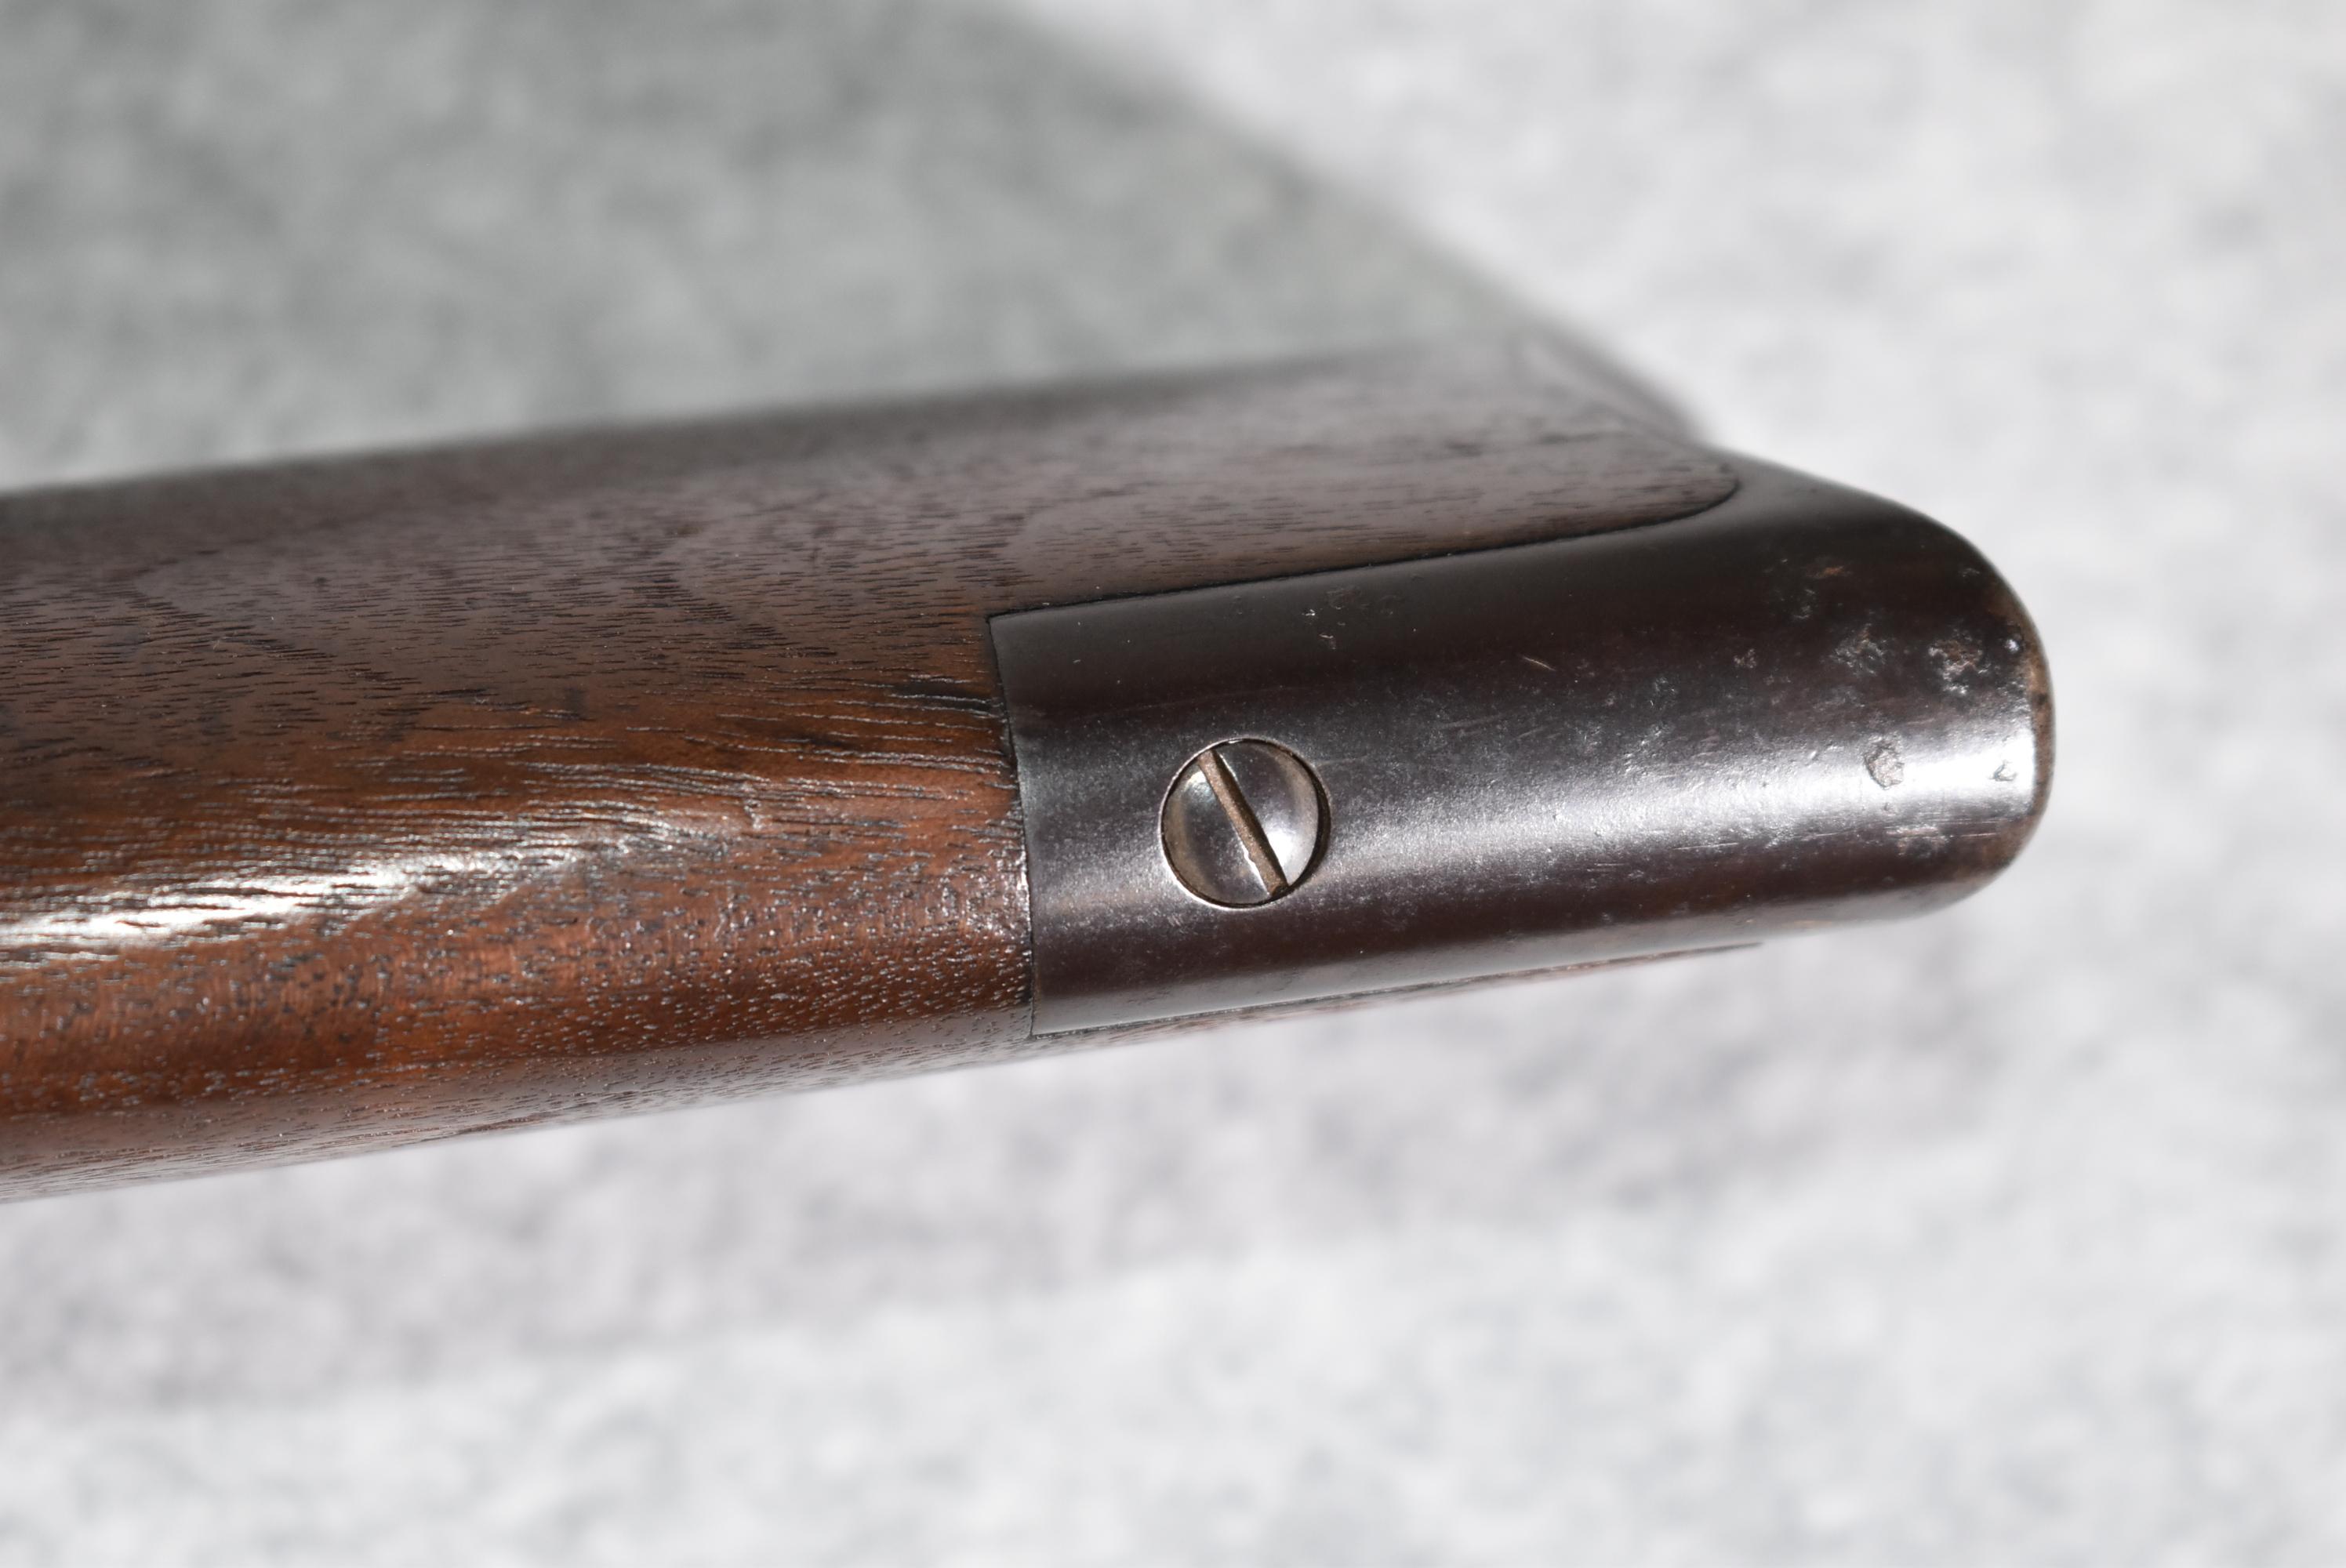 Winchester – Mod. 1873 3rd Model – 32 WCF (32-20) Cal. Lever Action Rifle